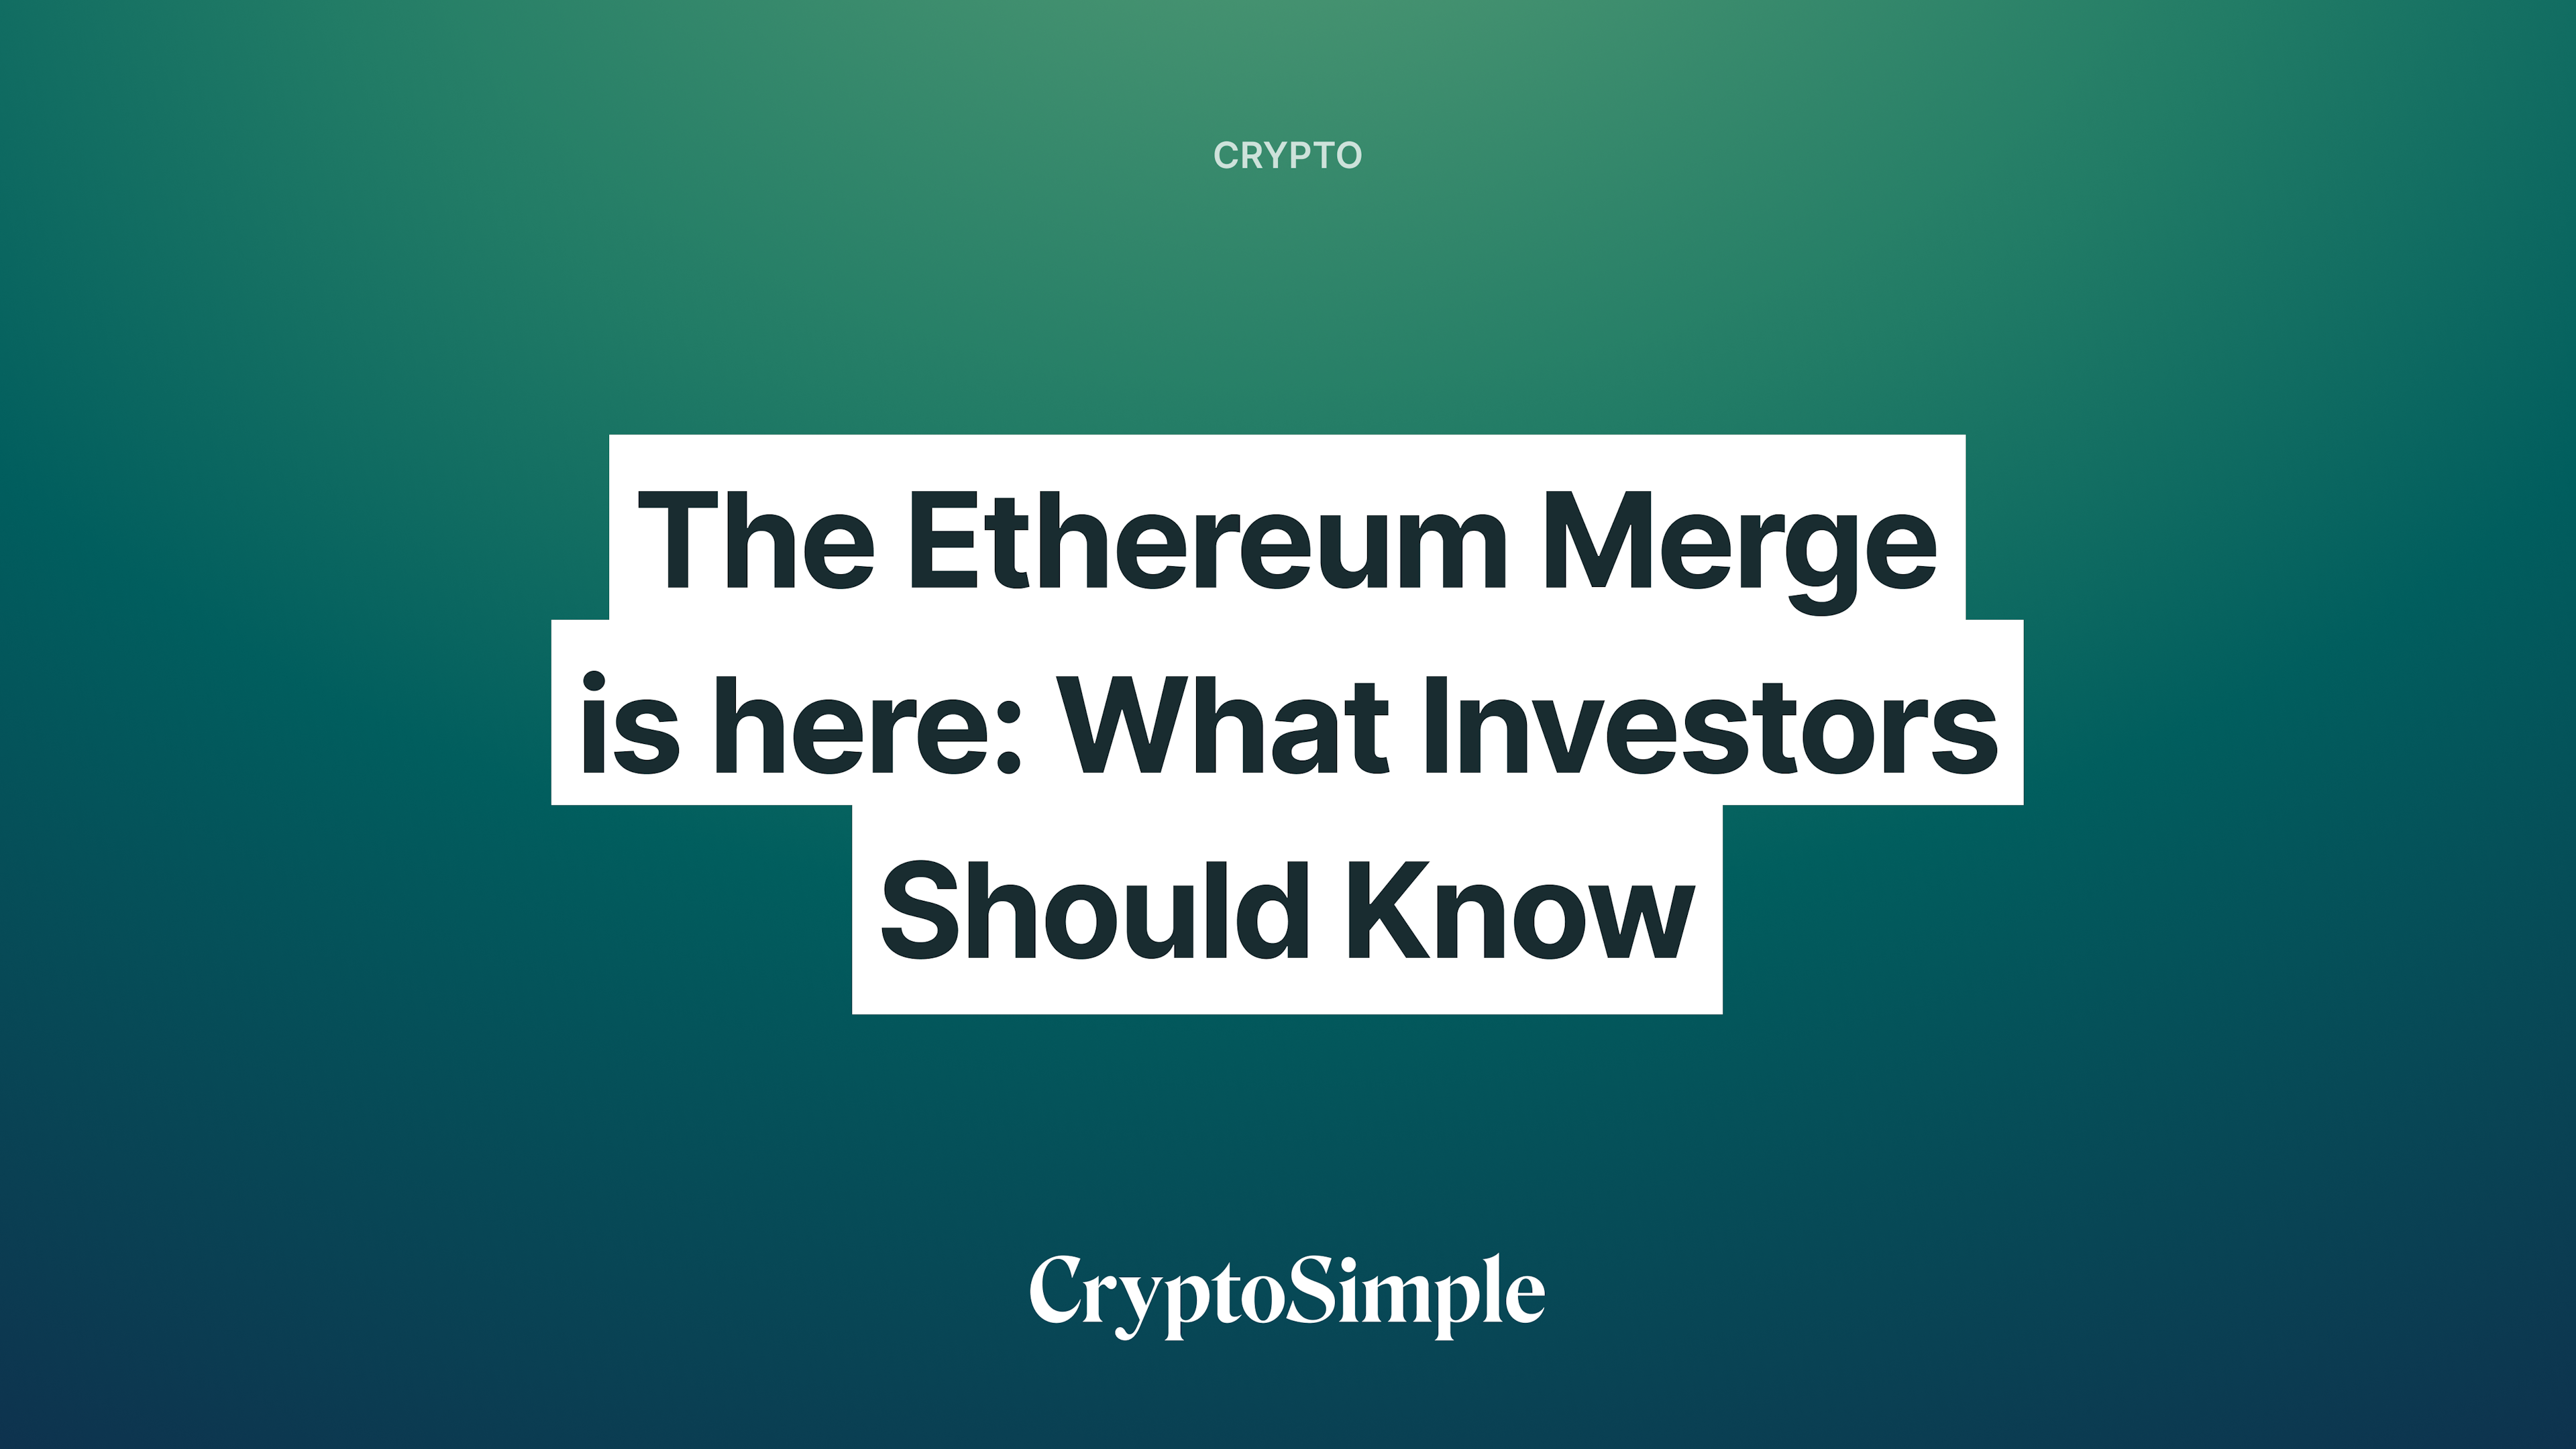 The Ethereum Merge is here: what investors should know